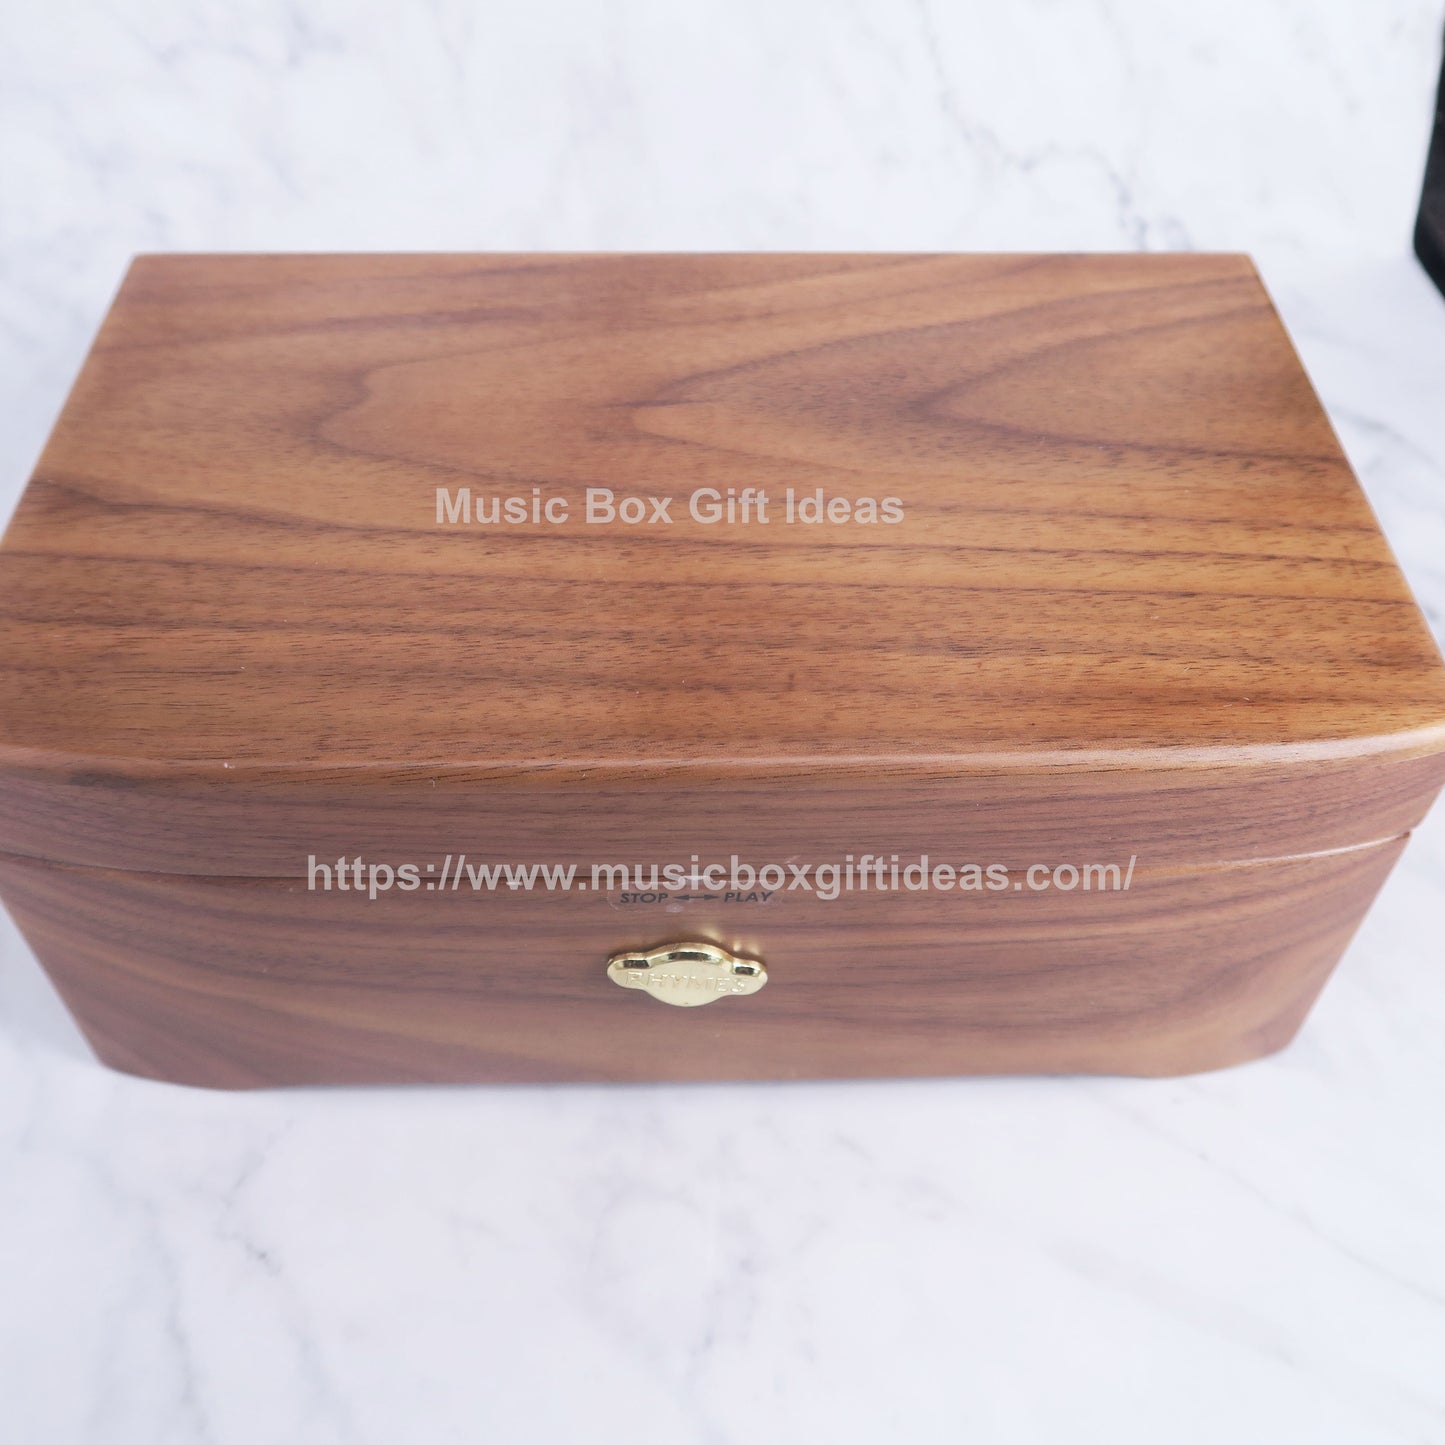 Ed Sheeran Perfect 50-Note Wind-Up Music Box Gift (Wooden) - Music Box Gift Ideas